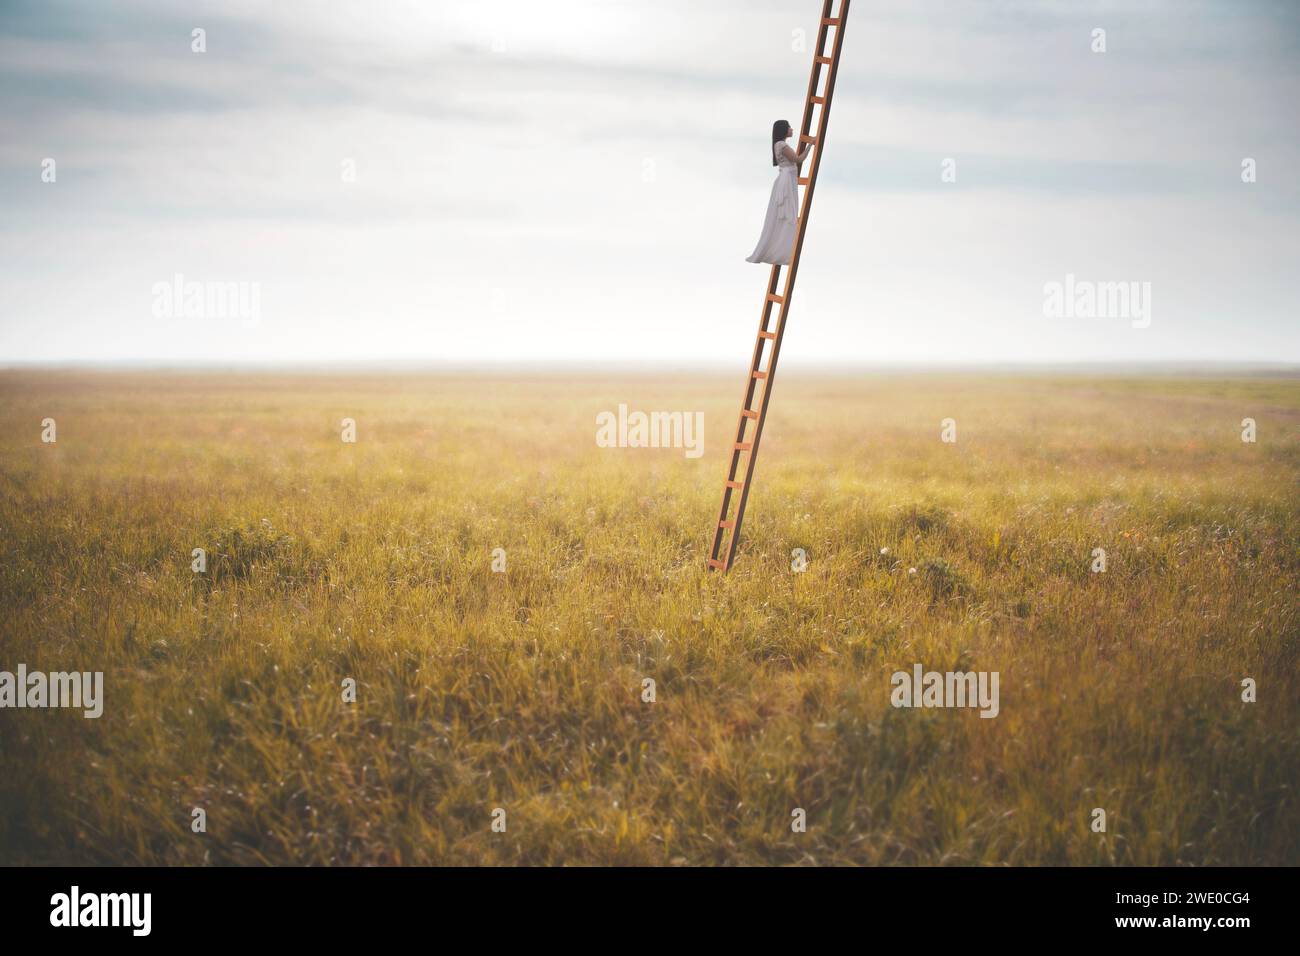 woman climbing a surreal ladder in the middle of a field reaching the sky, abstract concept Stock Photo